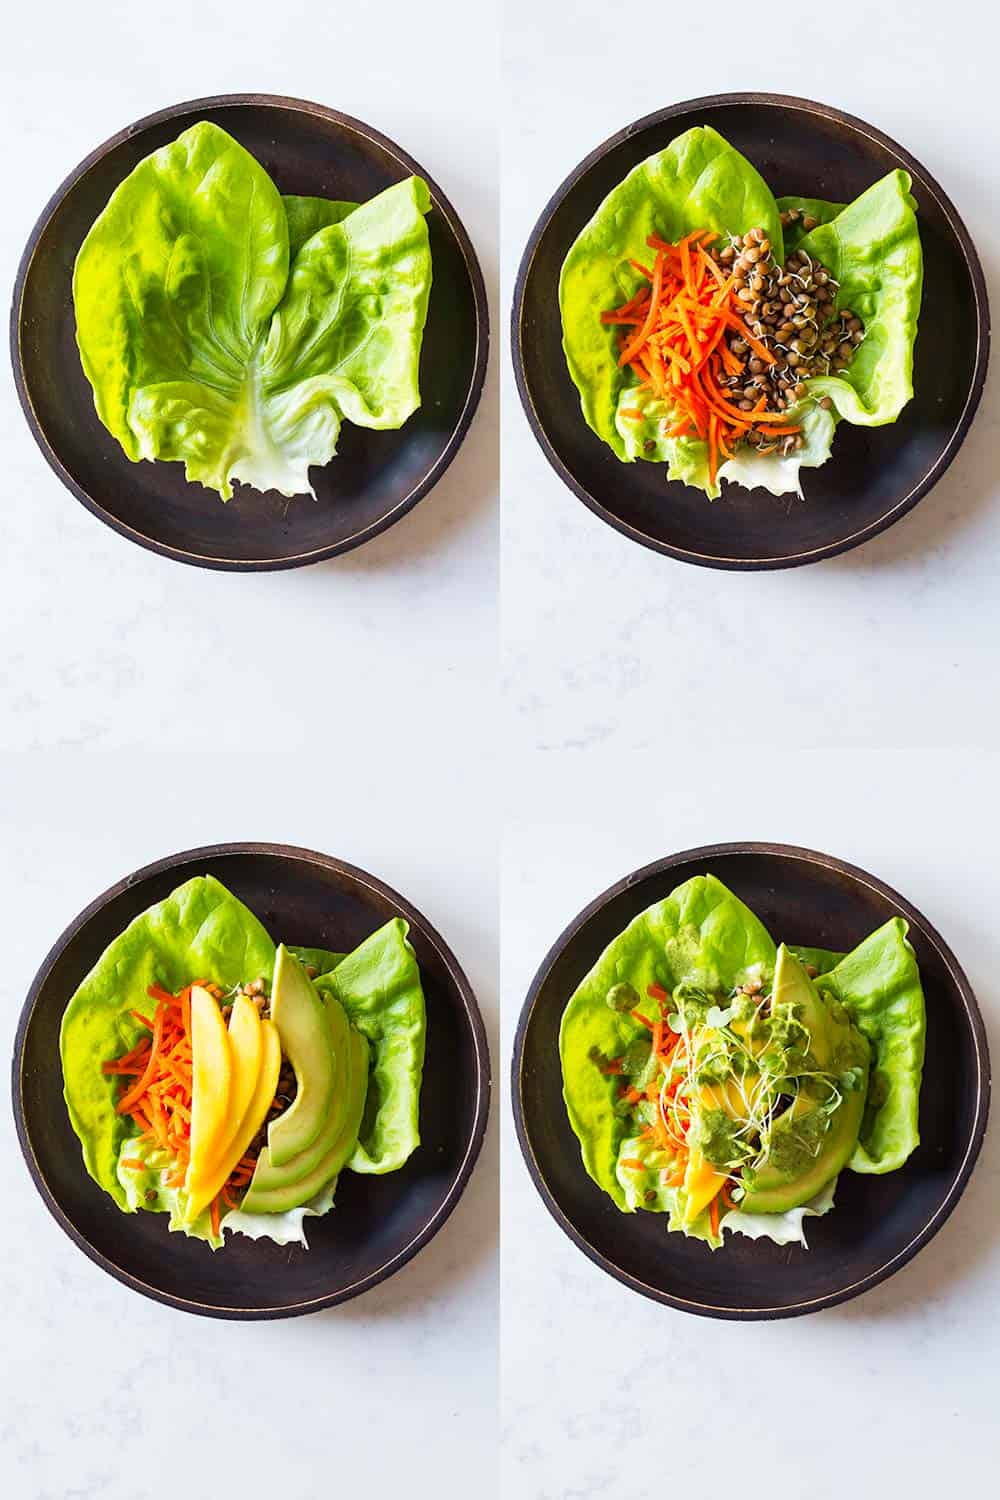 Step-by-step how-to instructions to build a vegan lettuce wrap.